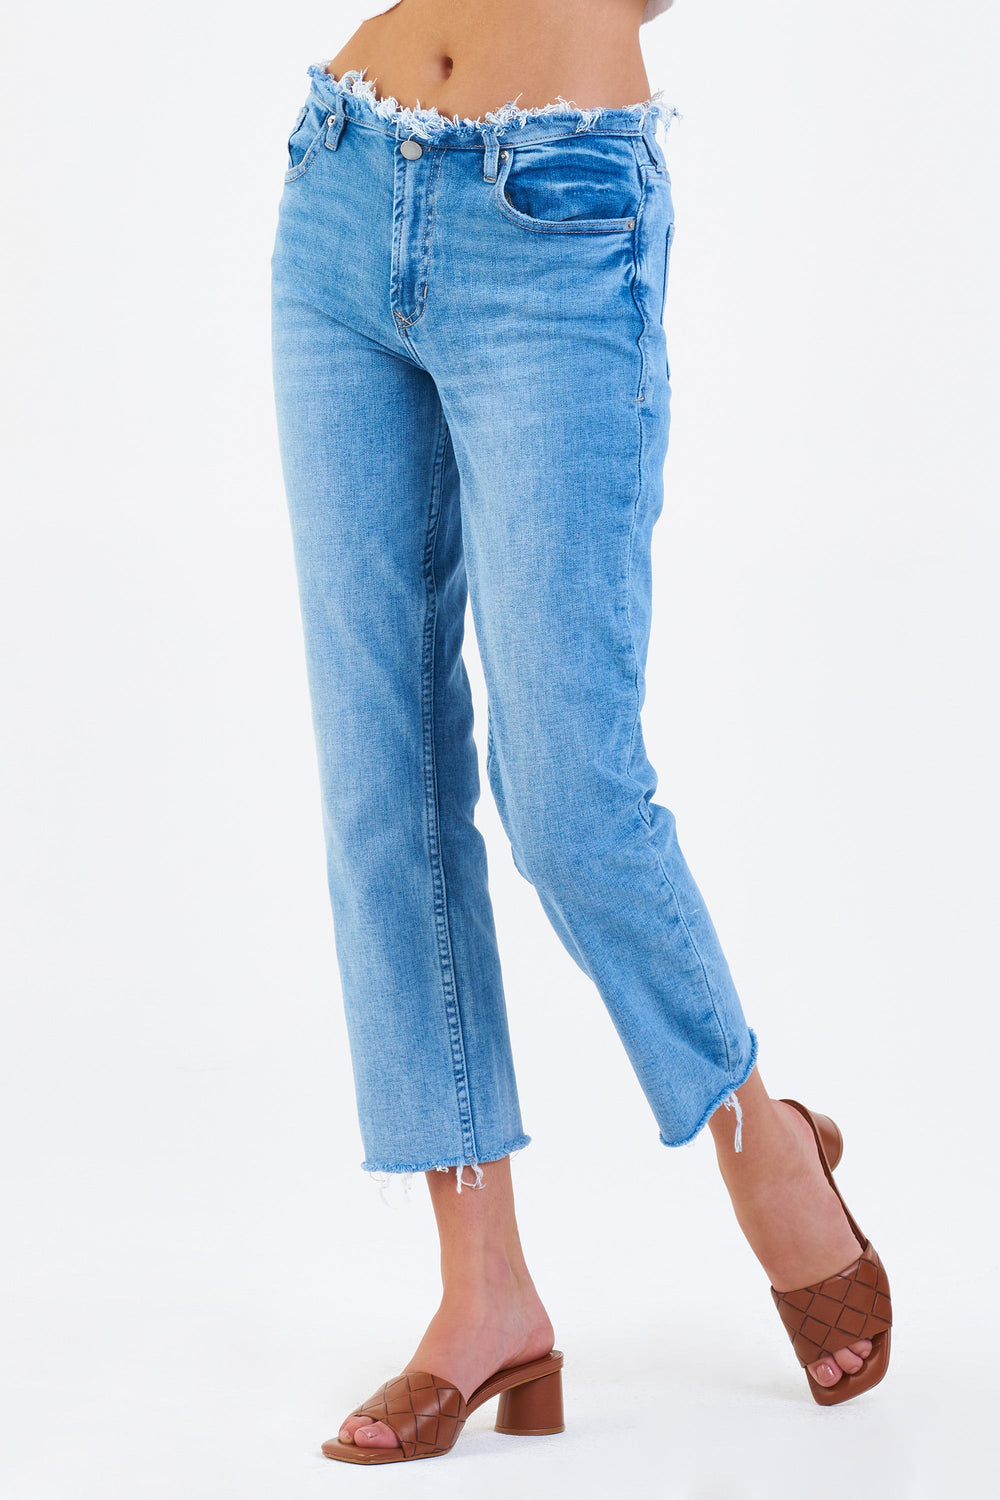 image of a female model wearing a JODI SUPER HIGH RISE CROPPED STRAIGHT LEG JEANS LIBERTY JEANS